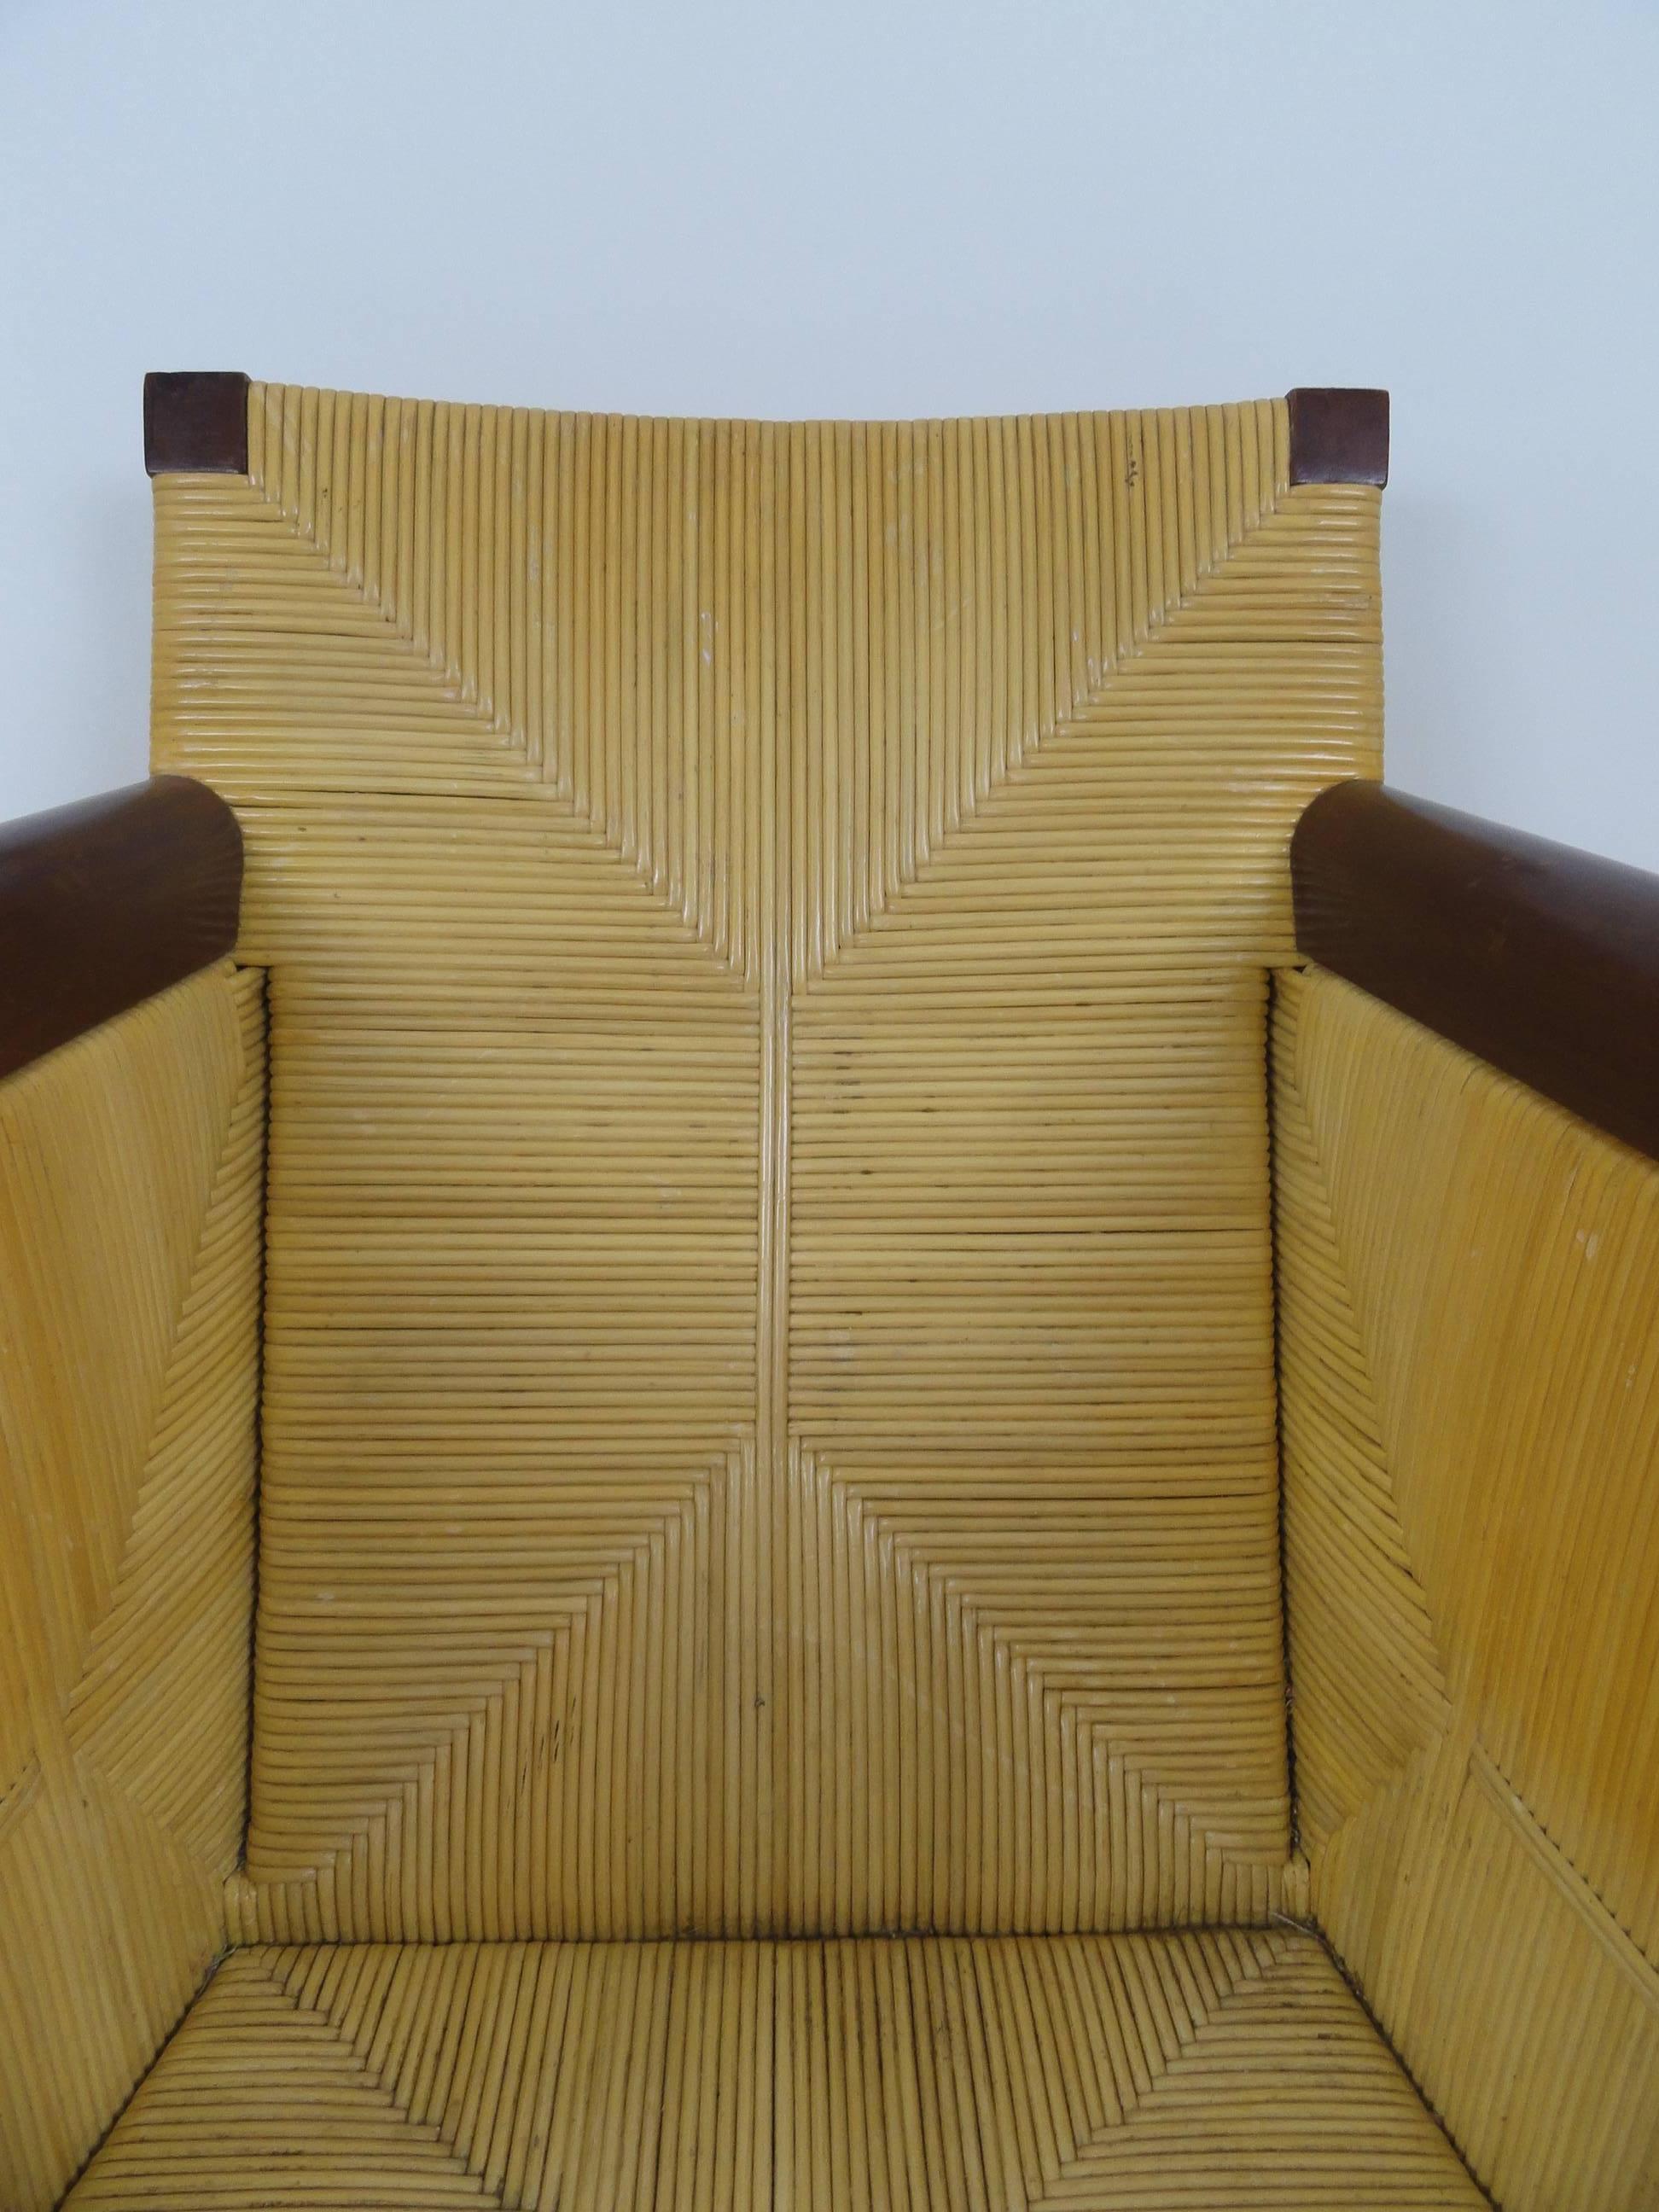 John Hutton club chair for the Donghia Berbau Collection. Contemporary lounge chair made of wicker and wood. No cushions.
This chair is a rare find and demonstrated original design by John Hutton.